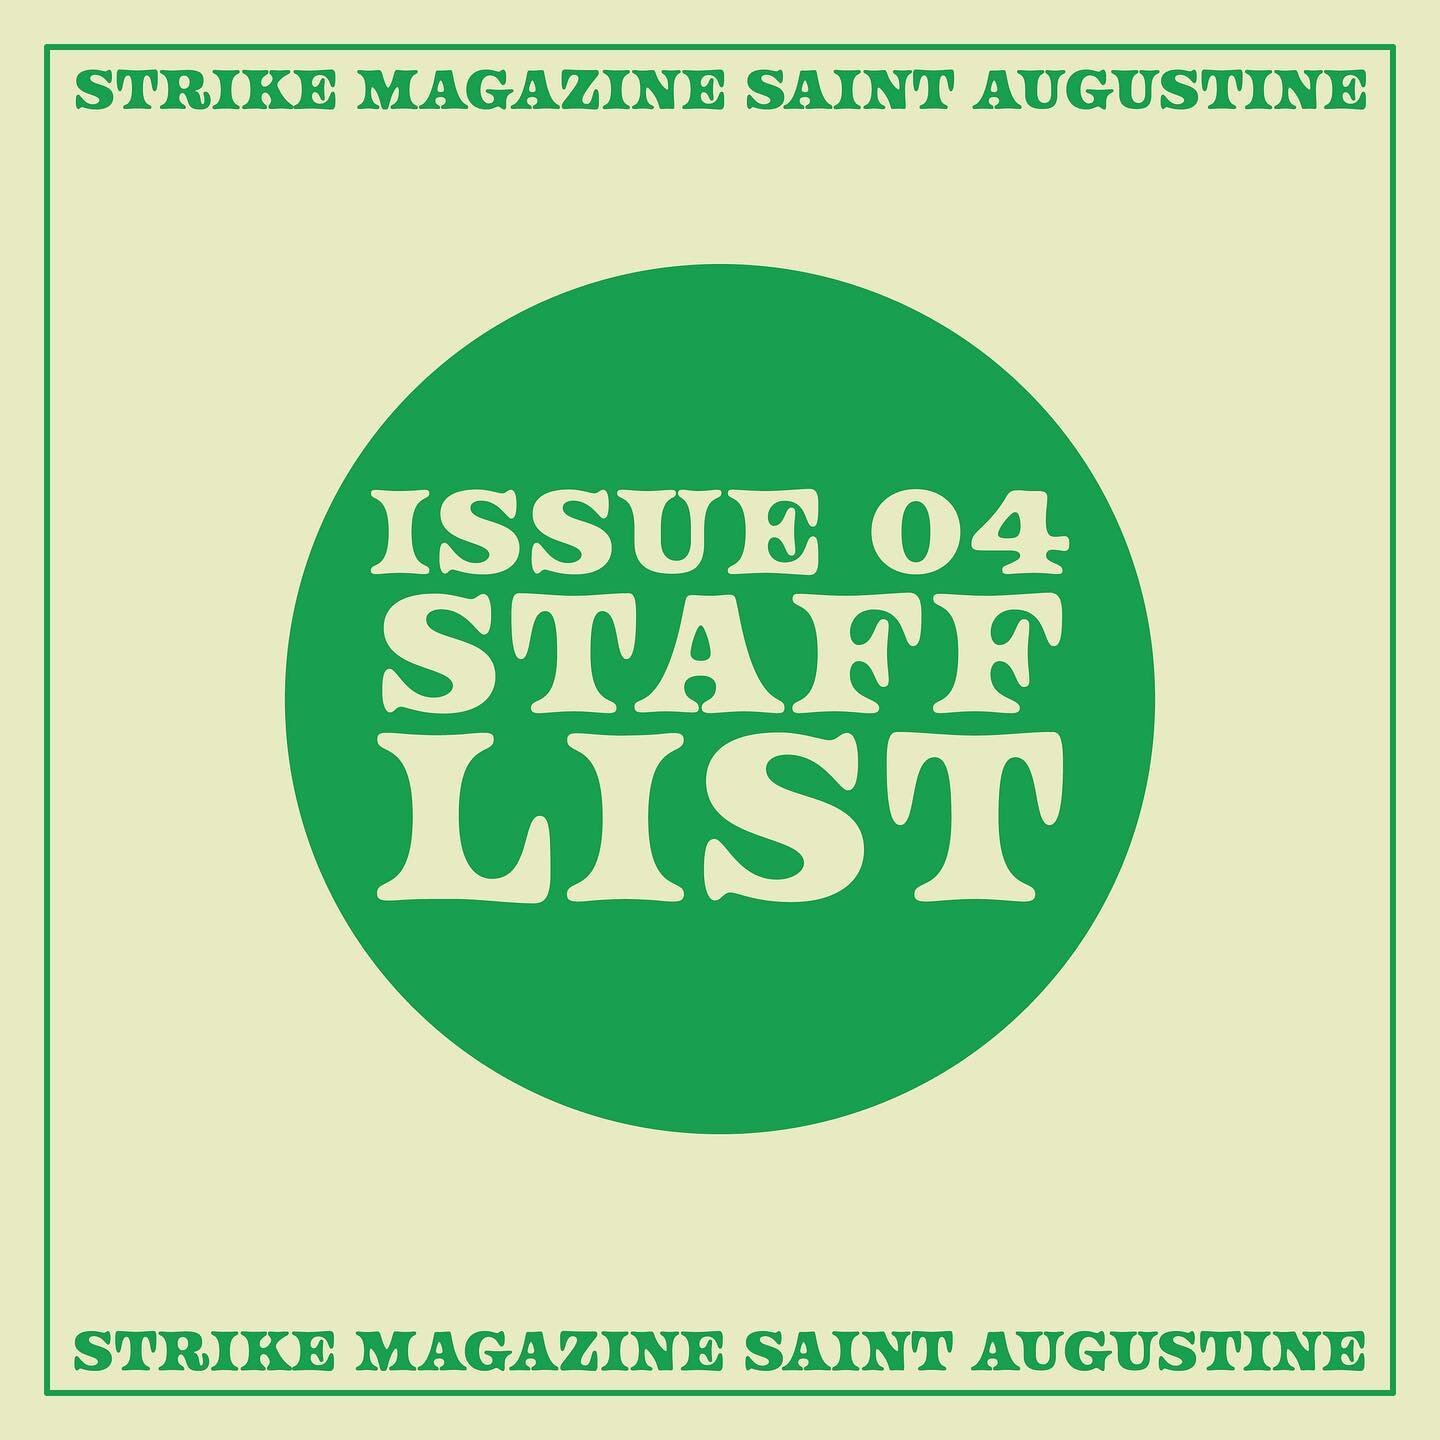 ANNOUNCING OUR ISSUE 04 STAFF ❇️